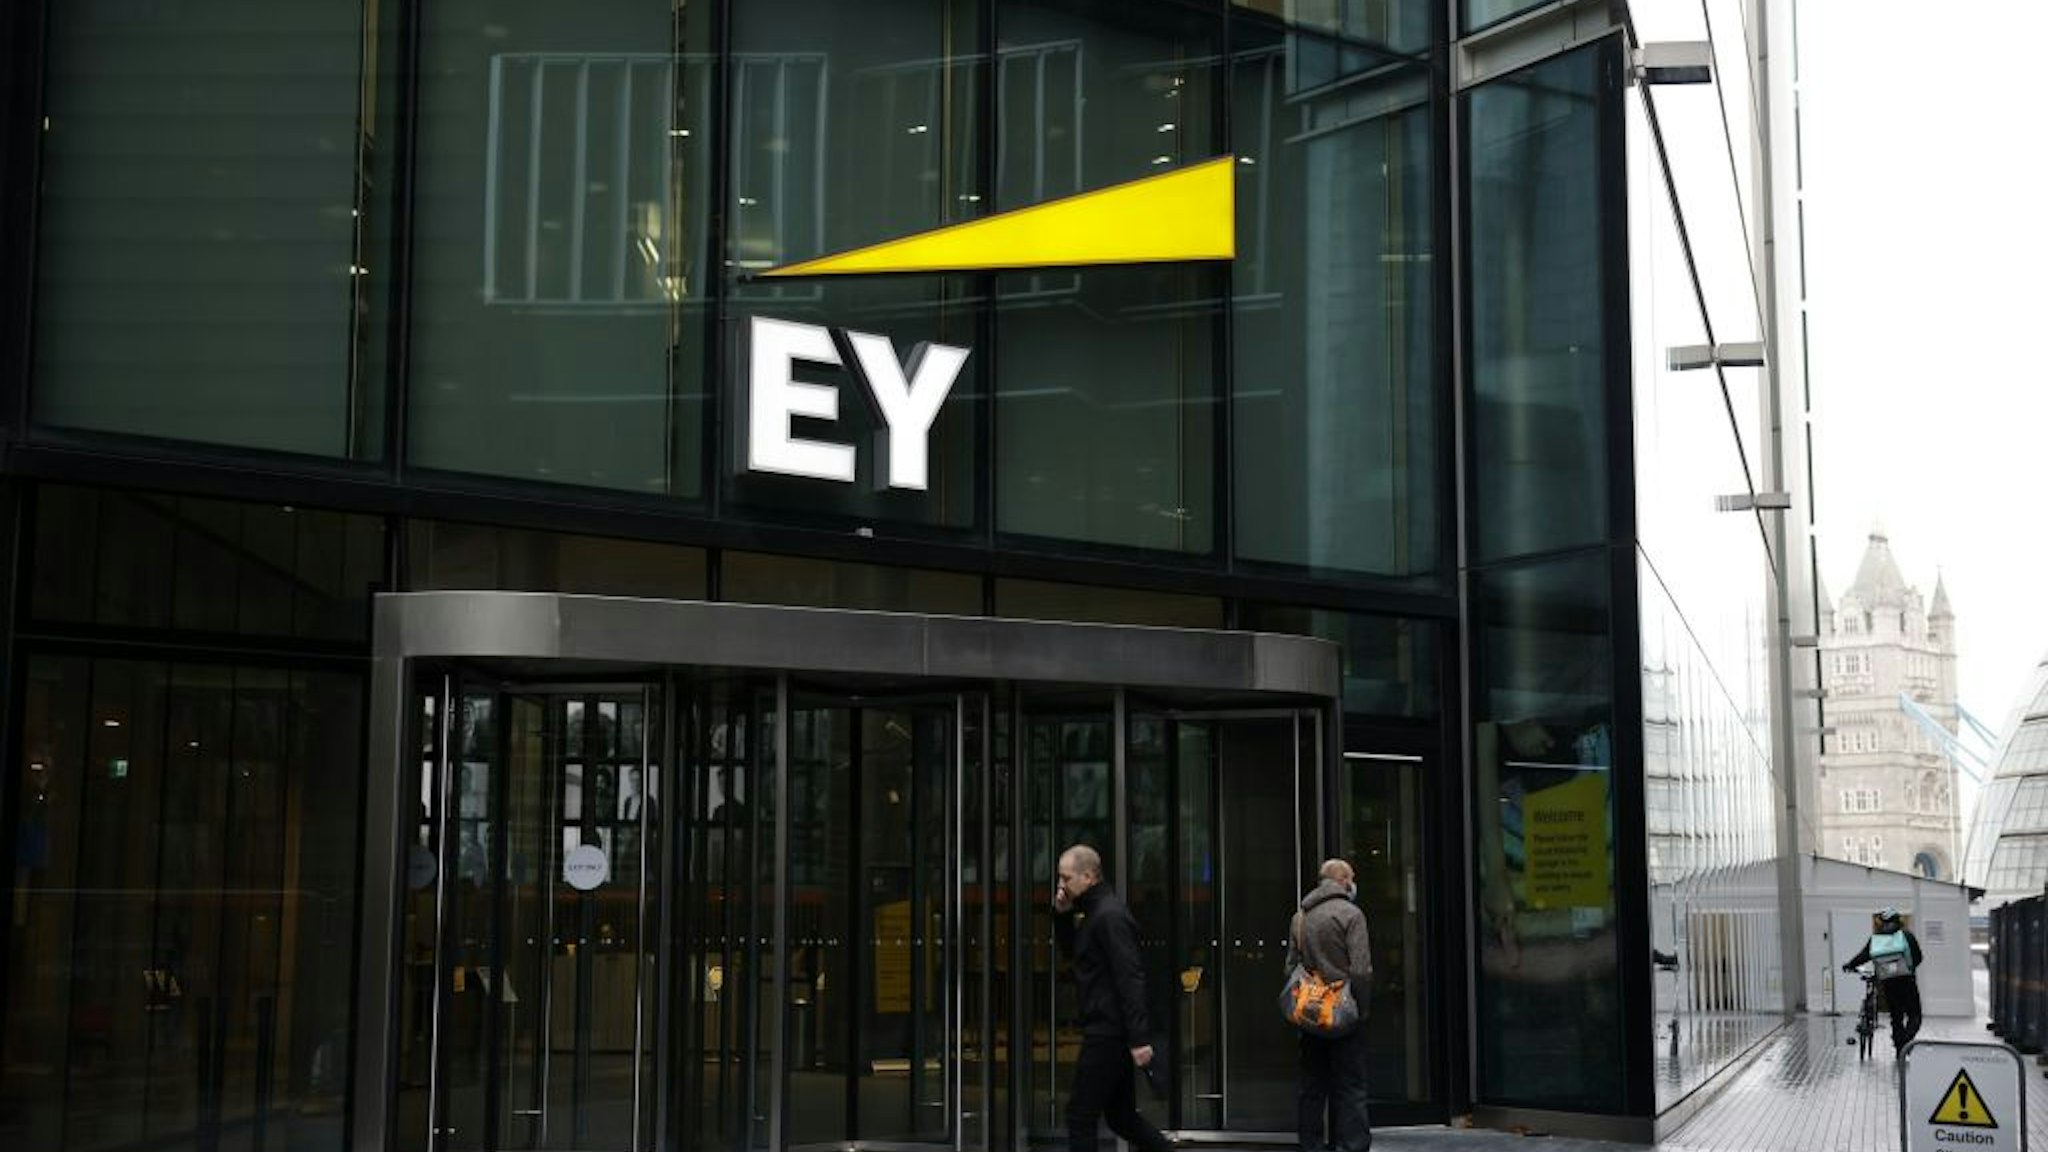 Pedestrians walk past the offices of accounting and auditing firm EY, formerly Ernst &amp; Young, in London on November 20, 2020. - Britain's audit sector, dominated by the so-called Big Four accountancy giants, is shortly expected to discover how it must reinvent itself amid a series of probes into alleged corruption, including one linked to the collapse of German electronic payments group Wirecard. The Department for Business, Energy and Industrial Strategy (BEIS) is reportedly set to publish reform proposals before Christmas amid fraudulent probes into EY-linked activities at Denmark's Danske Bank and Wirecard. EY has been accused of failing to warn about suspicious transactions at Danish bank Danske Bank worth billions of euros.